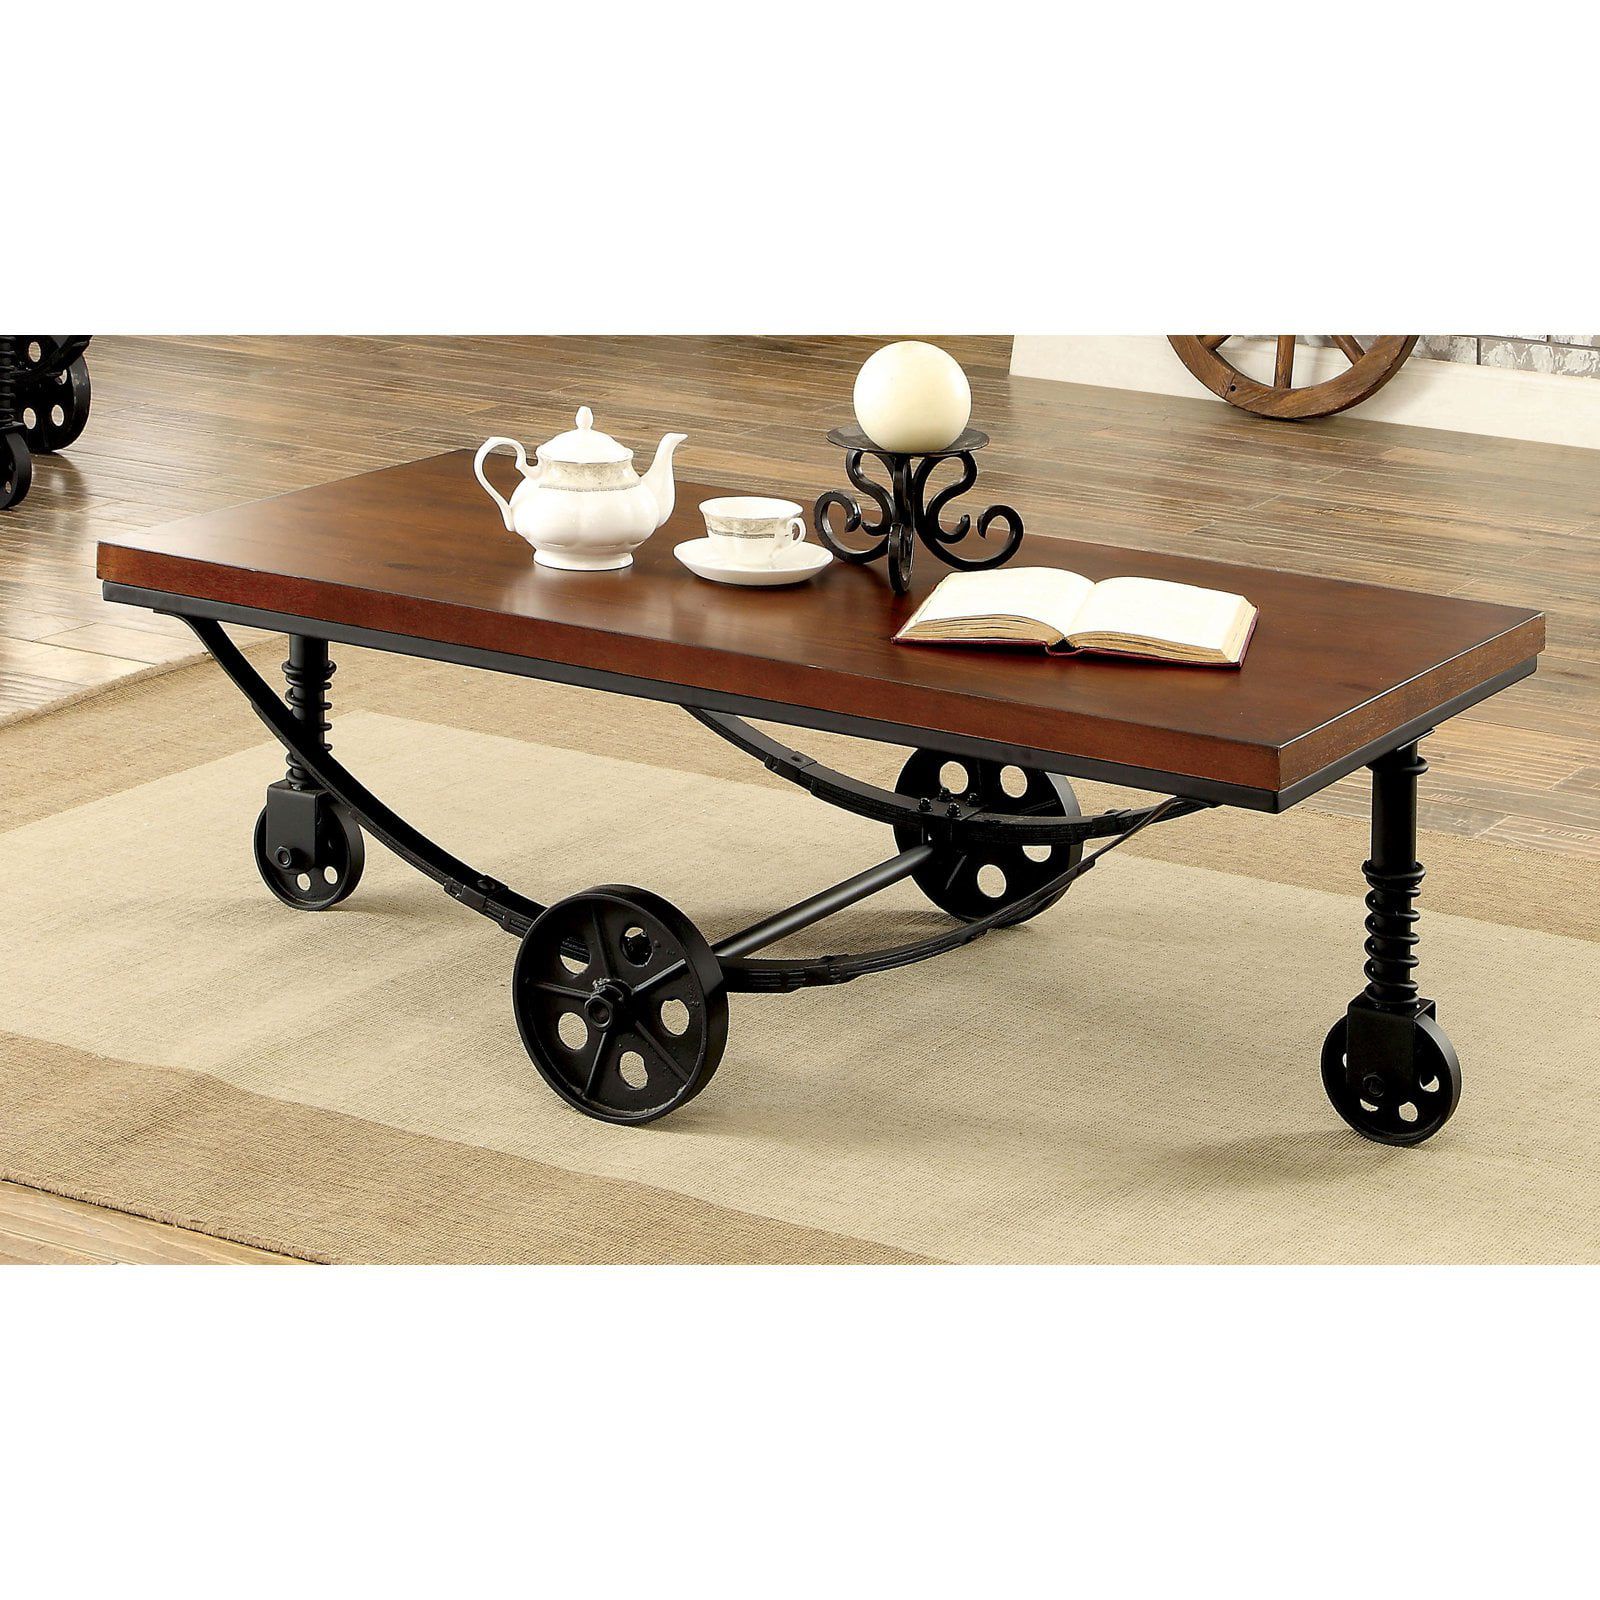 Furniture Of America Mator Industrial Style Caster Wheel Coffee Table With Coffee Tables With Casters (View 3 of 20)